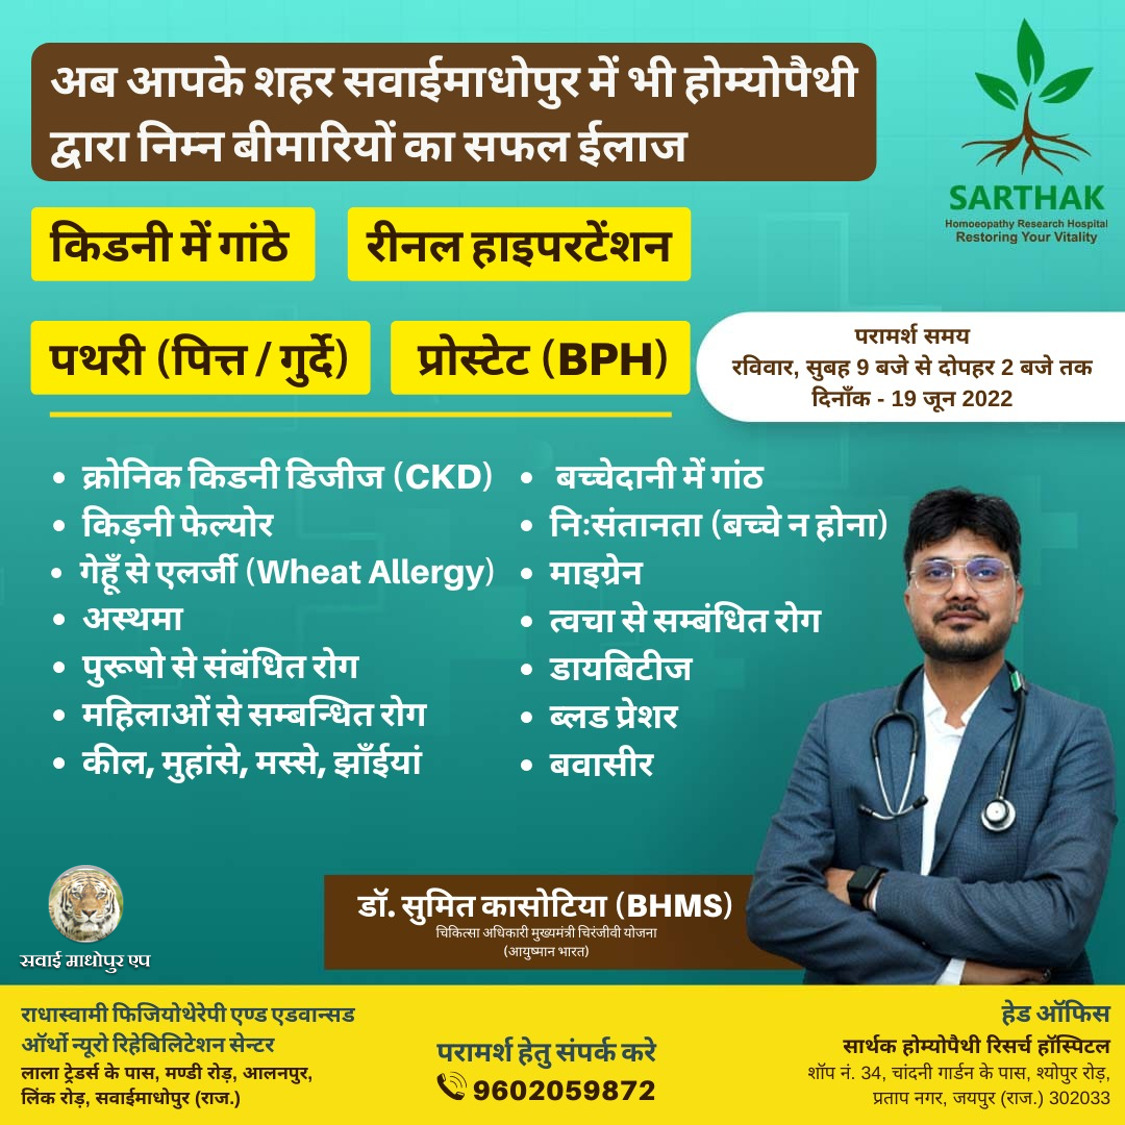 Homeopathy medical service now available in Sawai Madhopur